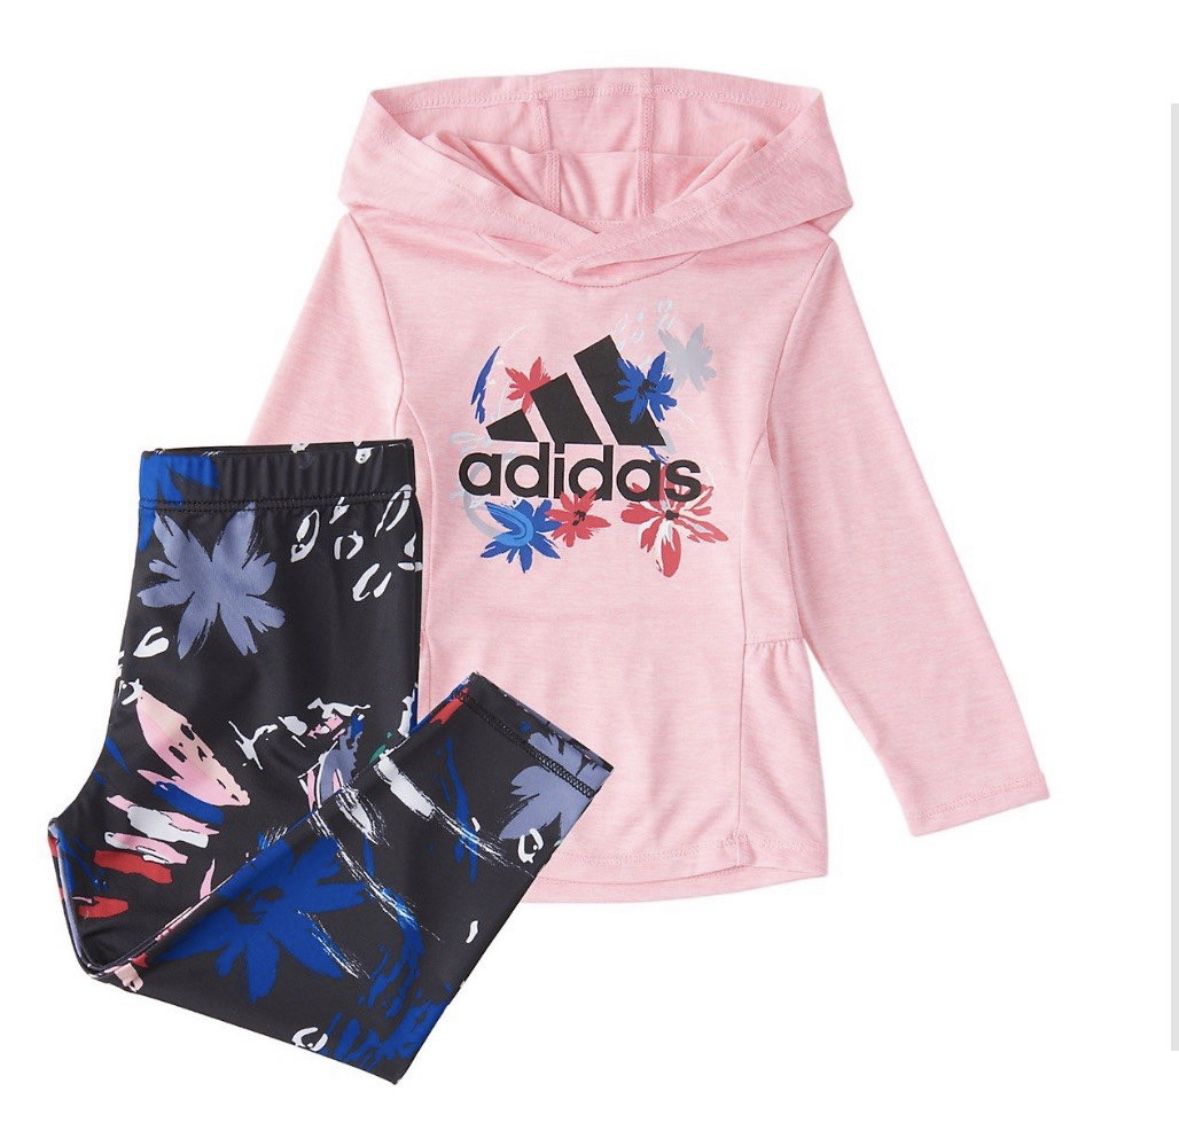 Girls Adidas Hooded Top and Printed Leggings Set Size 6